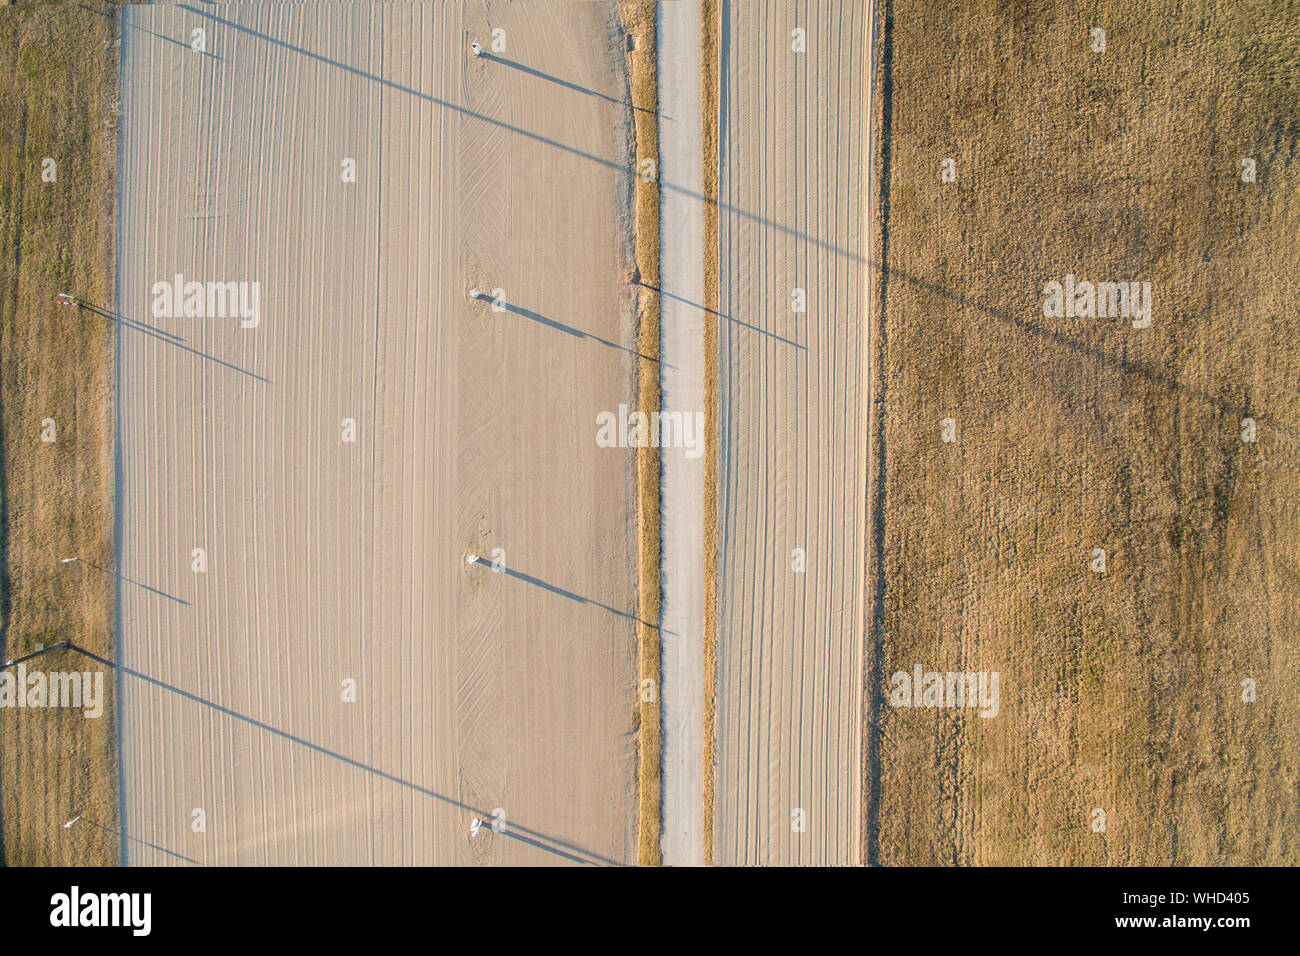 Aerial View Of Horseracing Track On Sunny Day Stock Photo